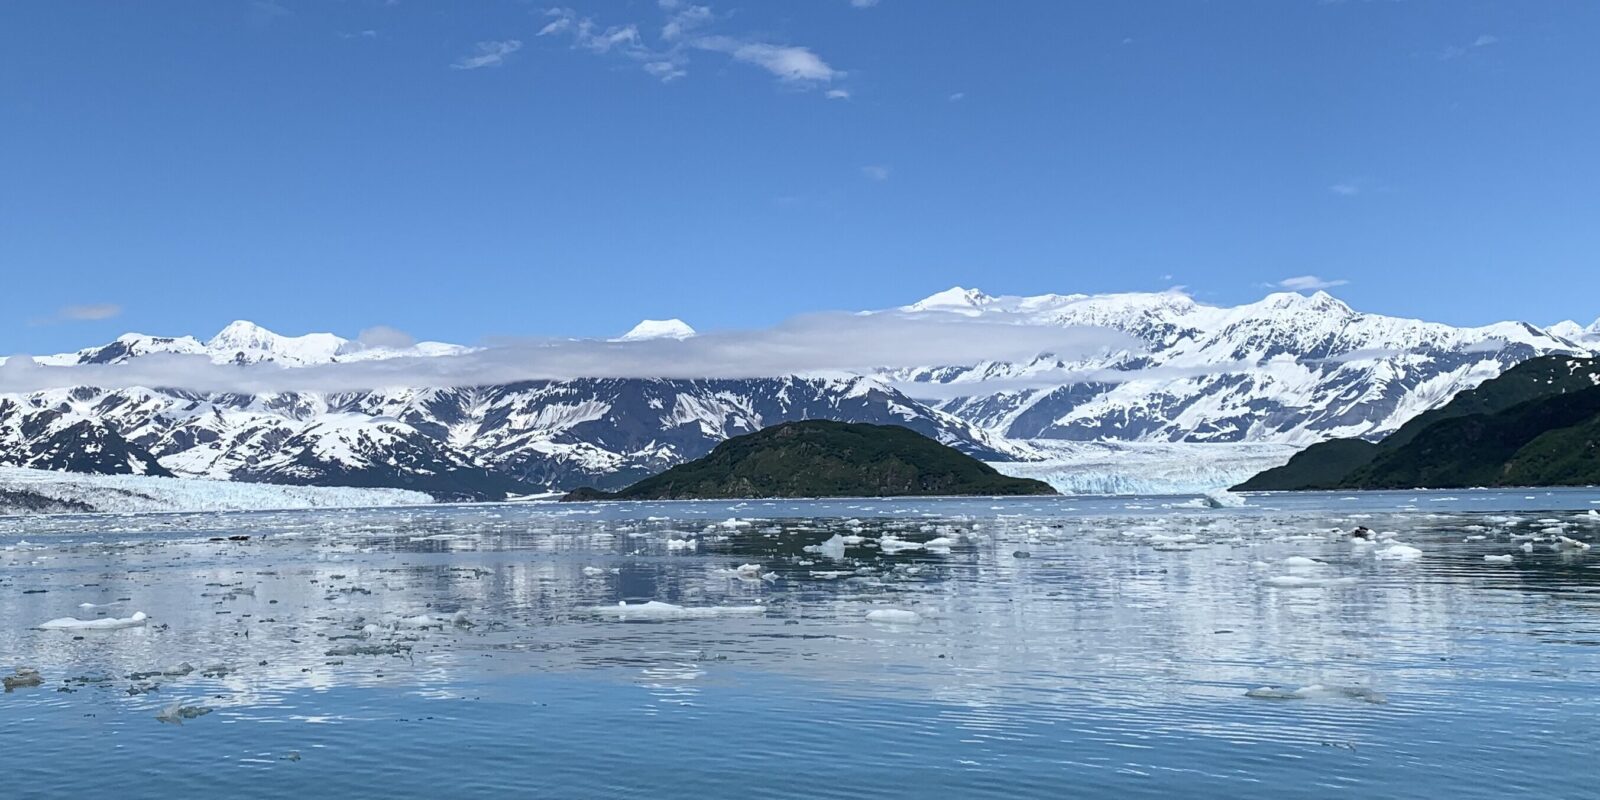 Blue skies reflected on a glacial fjord. The glacier and ice covered mountains are visible in the distance.